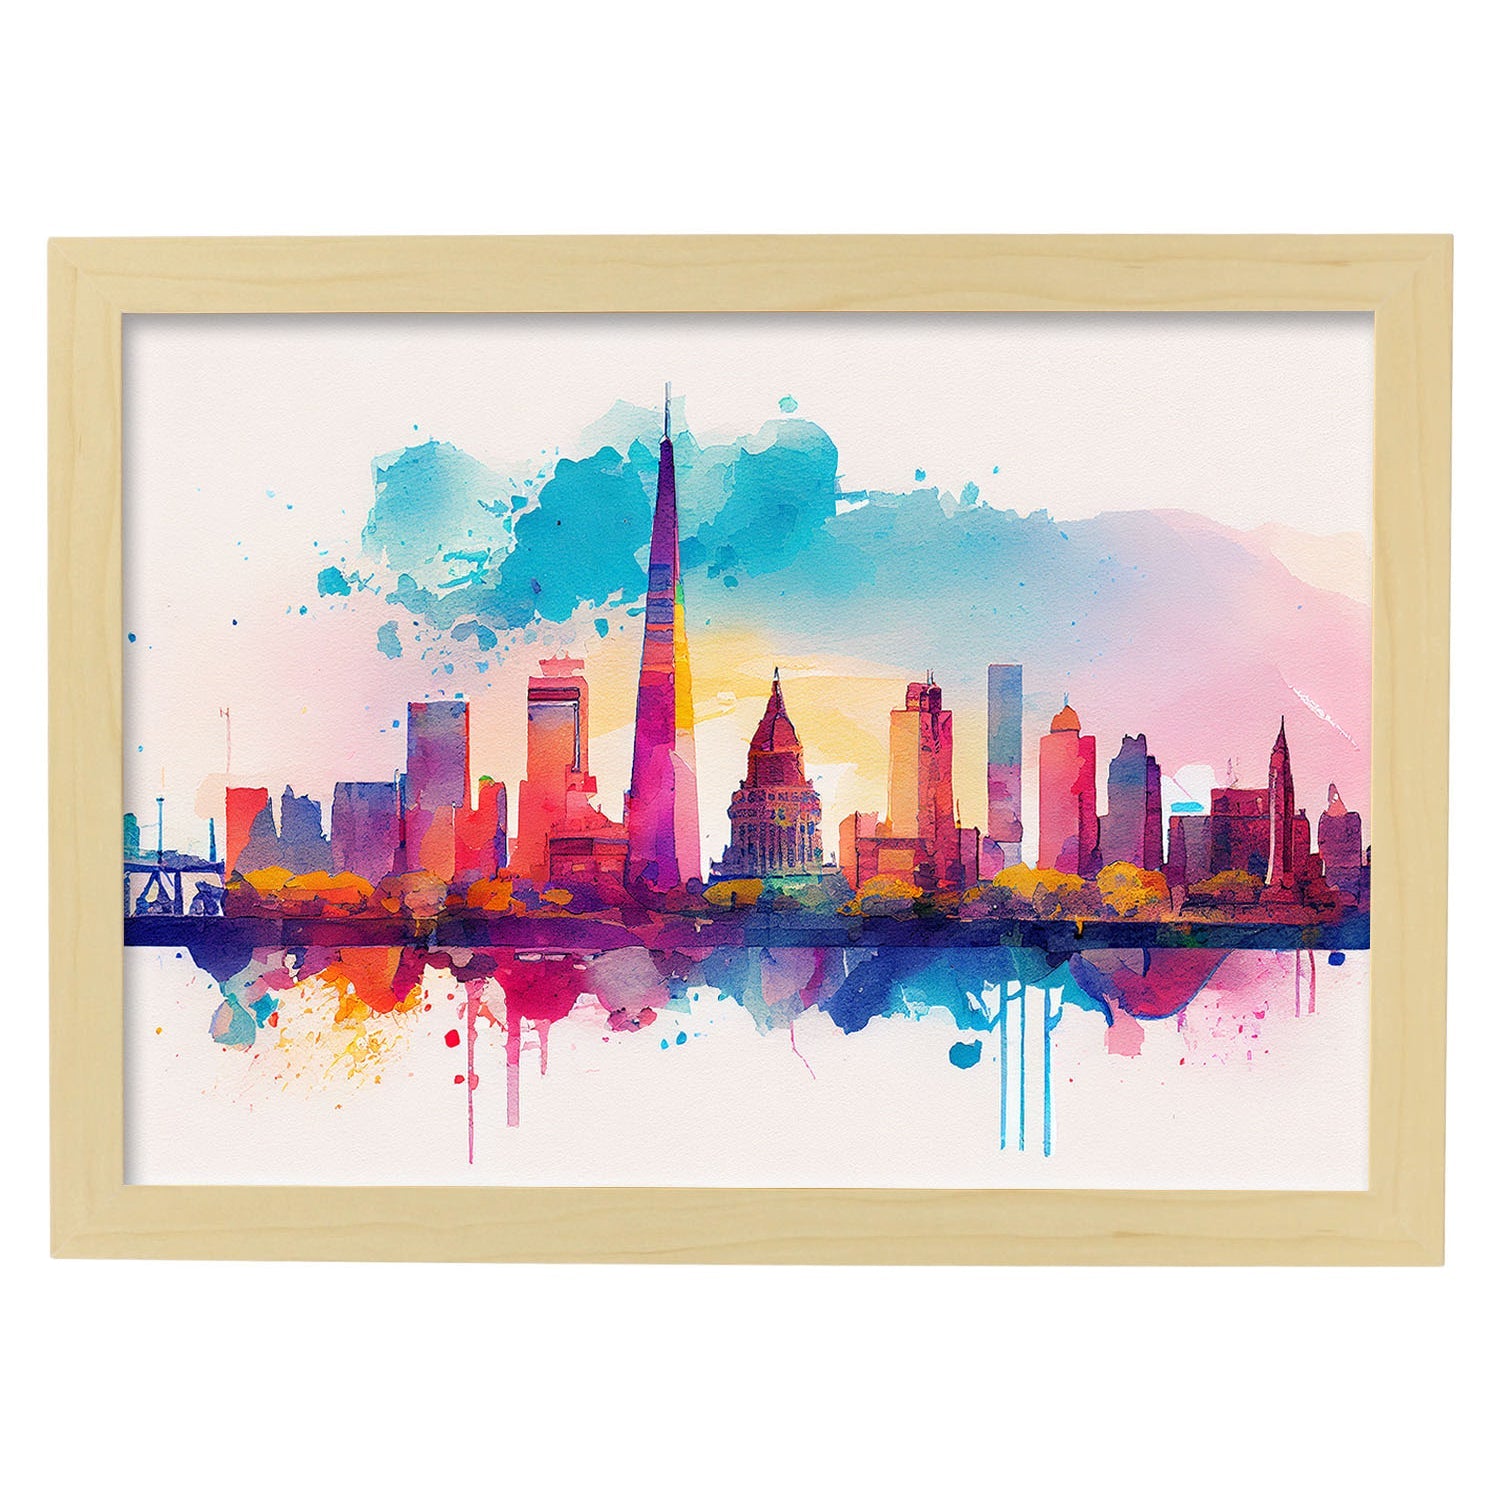 Nacnic watercolor of a skyline of the city of Buenos Aires_1. Aesthetic Wall Art Prints for Bedroom or Living Room Design.-Artwork-Nacnic-A4-Marco Madera Clara-Nacnic Estudio SL